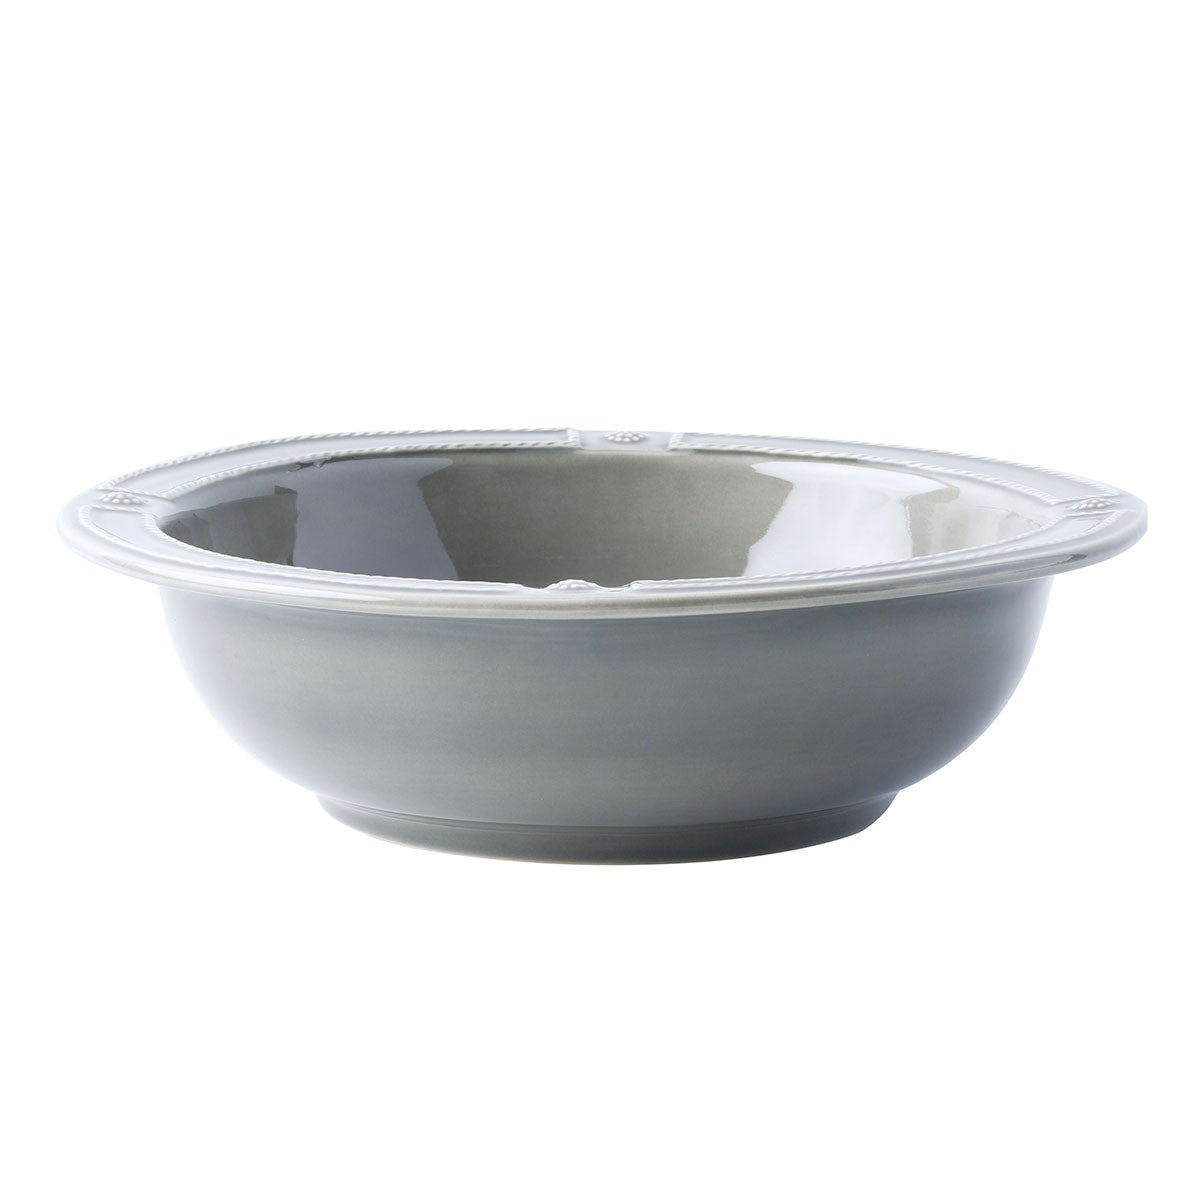 stone gray berry and thread serving bowl on a white background